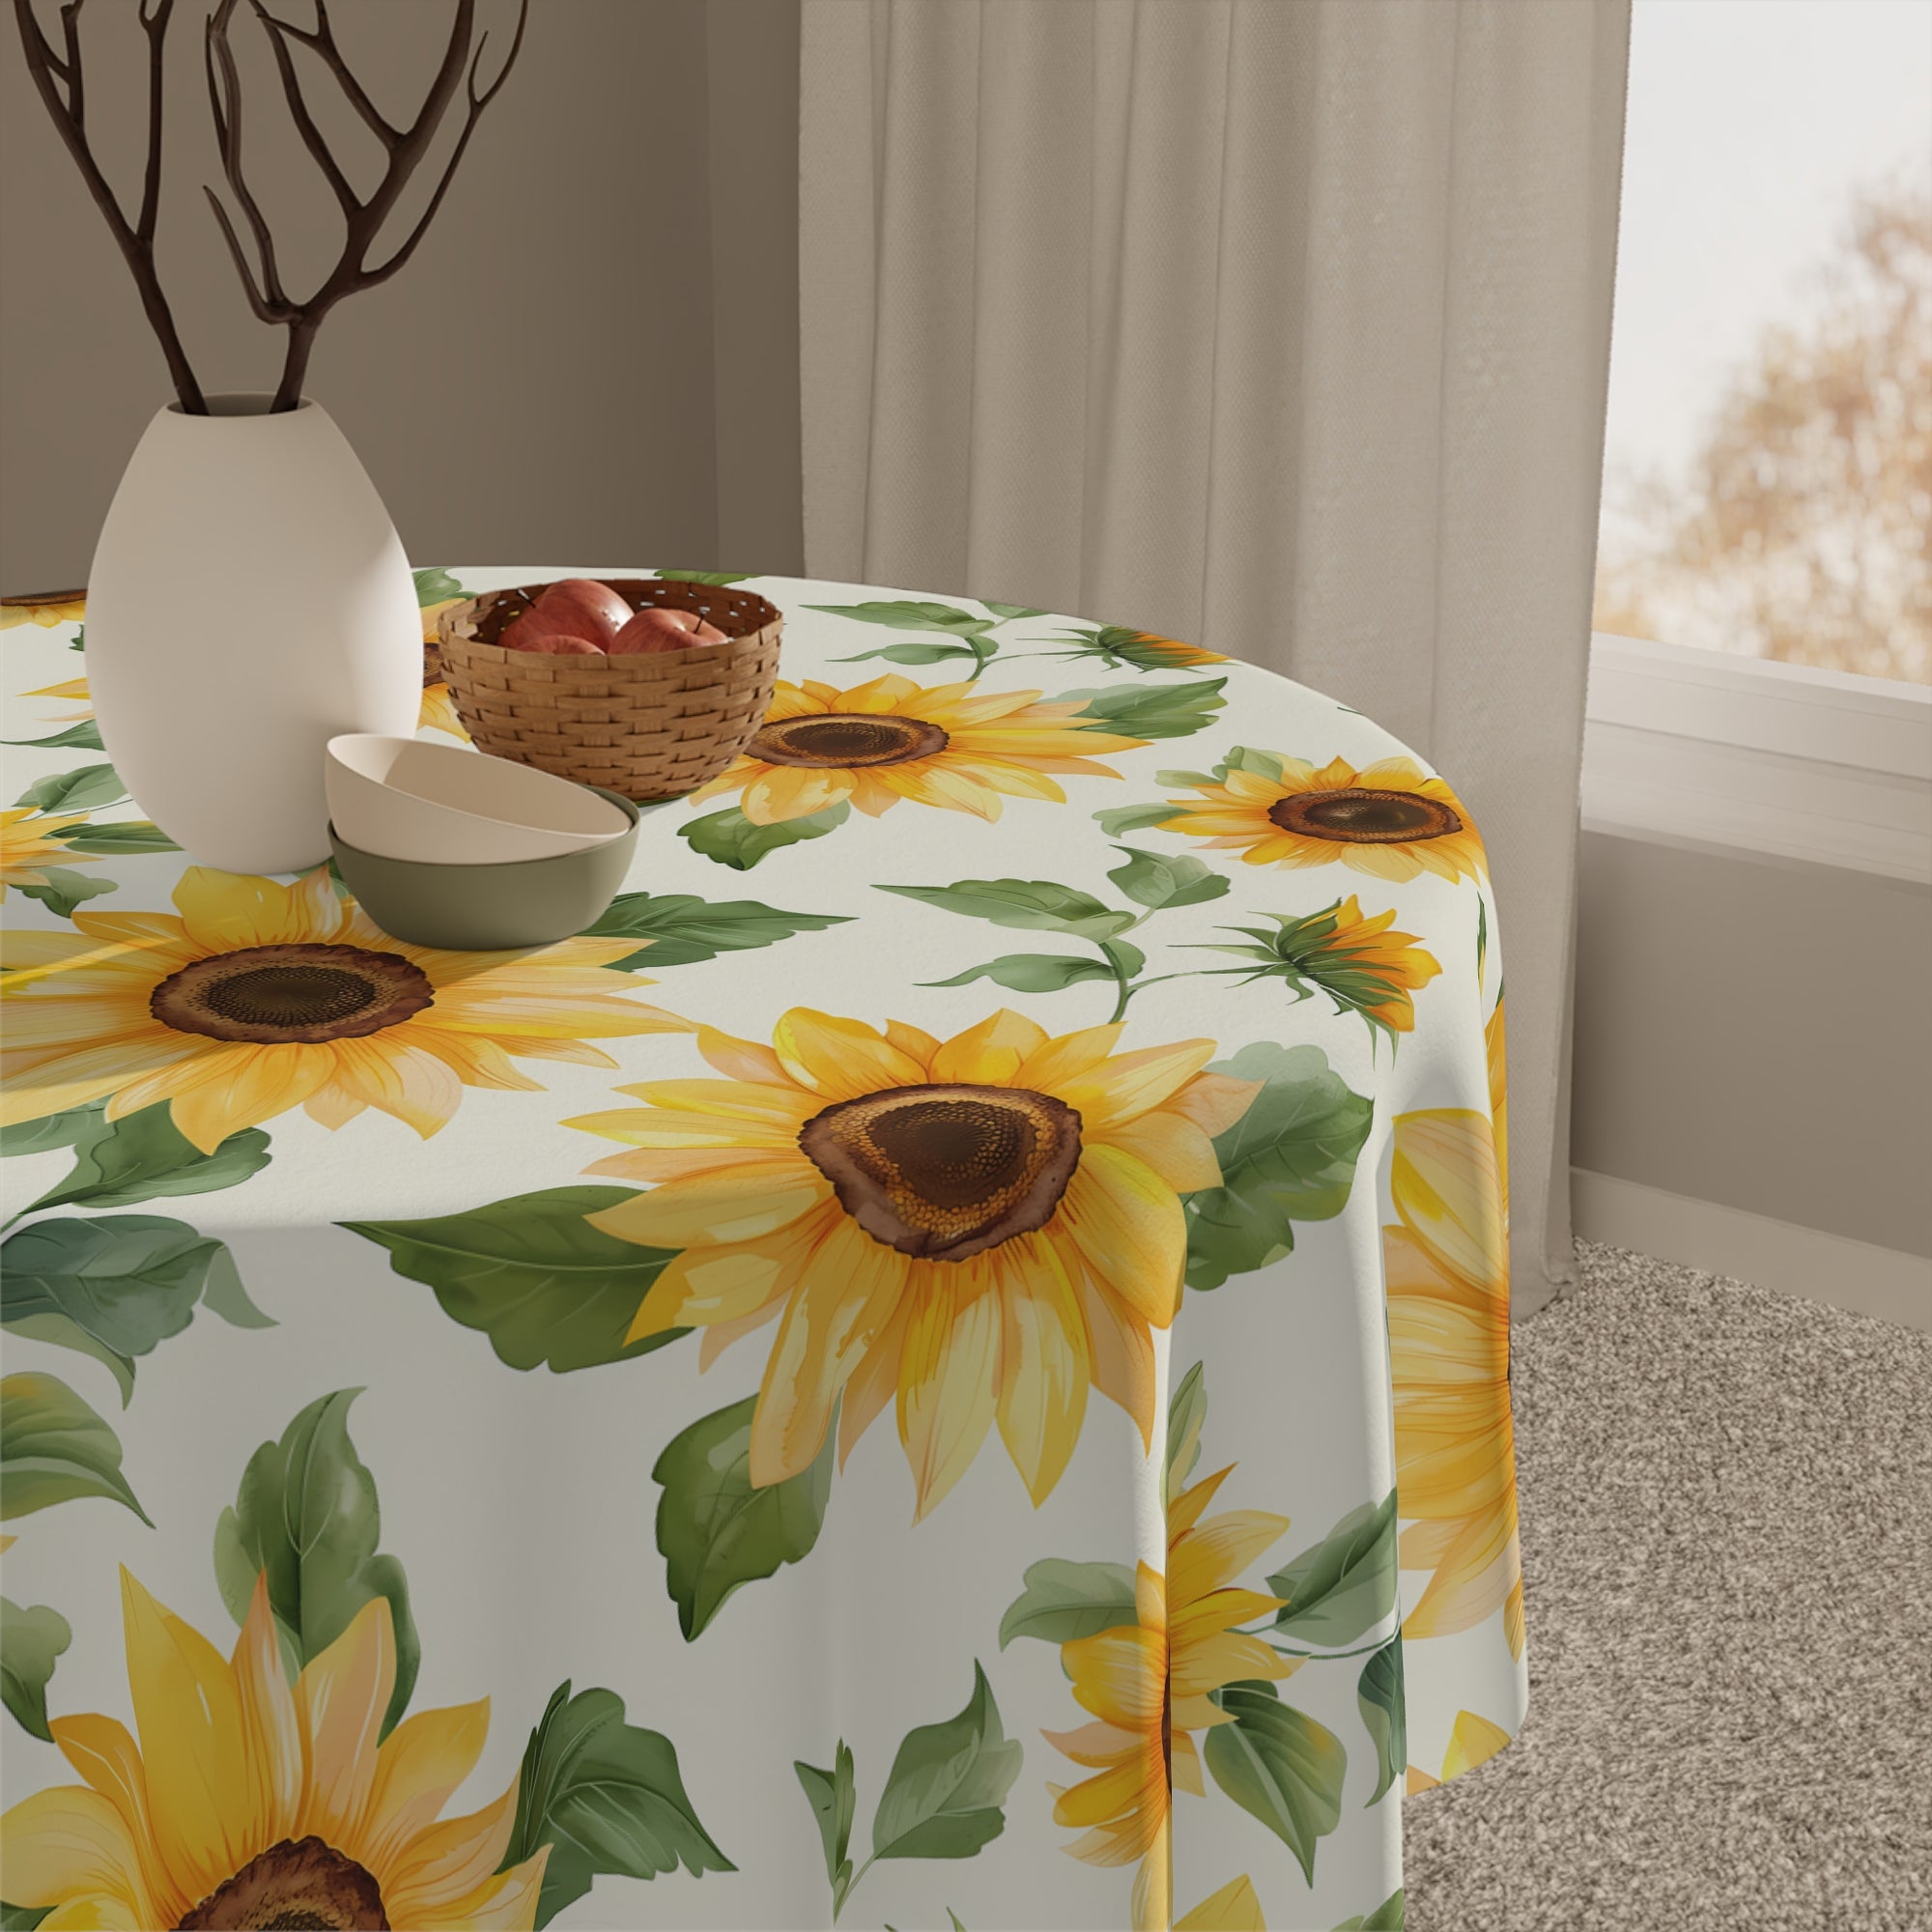 Decorative Tablecloth with Radiant Sunflower Design, Durable Polyester (55.1" x 55.1")